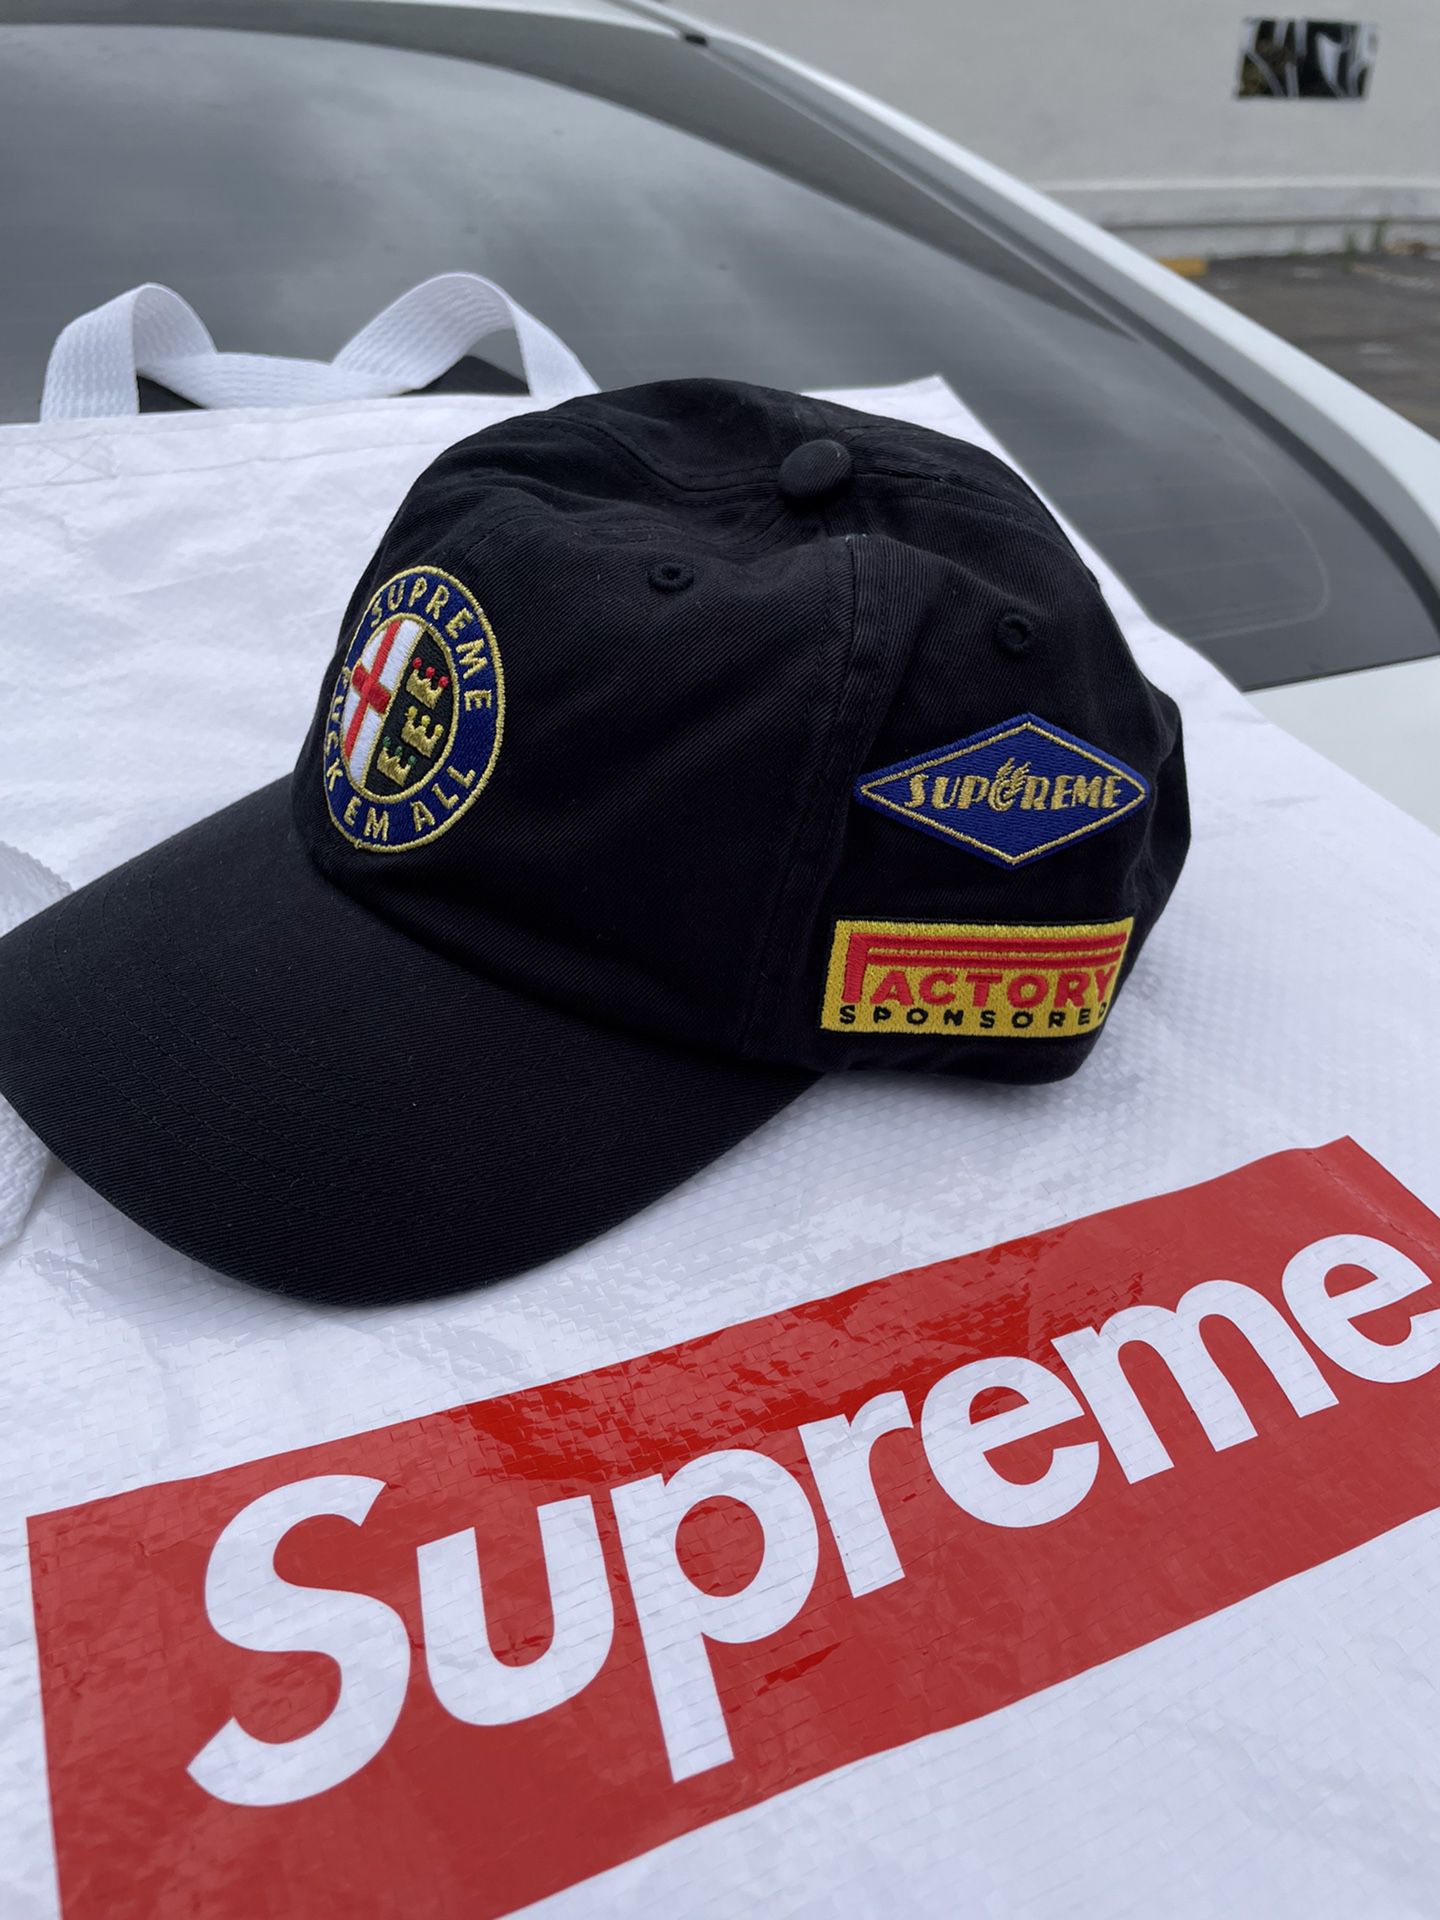 Supreme Black 5 Panel Hat for Sale in Seattle, WA - OfferUp